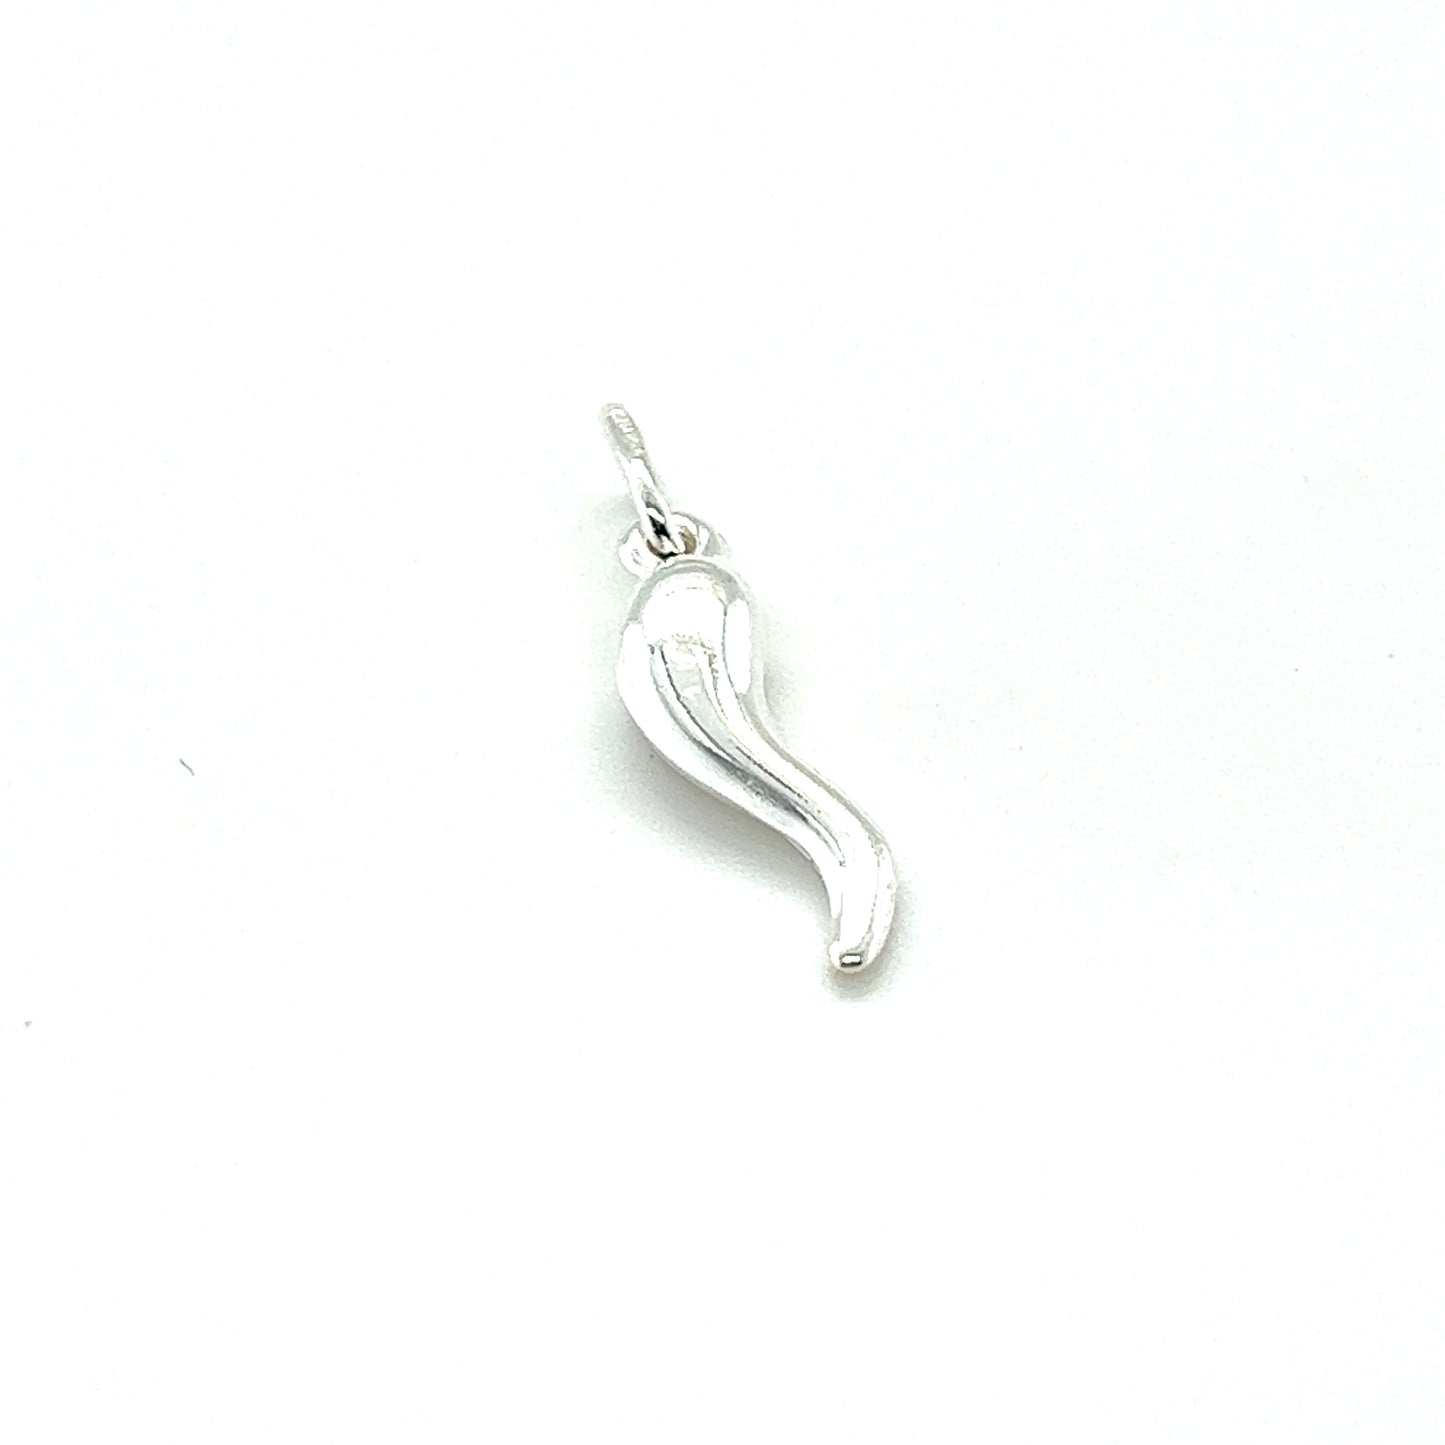 
                  
                    A Super Silver Italian Horn Charm, symbolizing good fortune, displayed on a clean white background.
                  
                